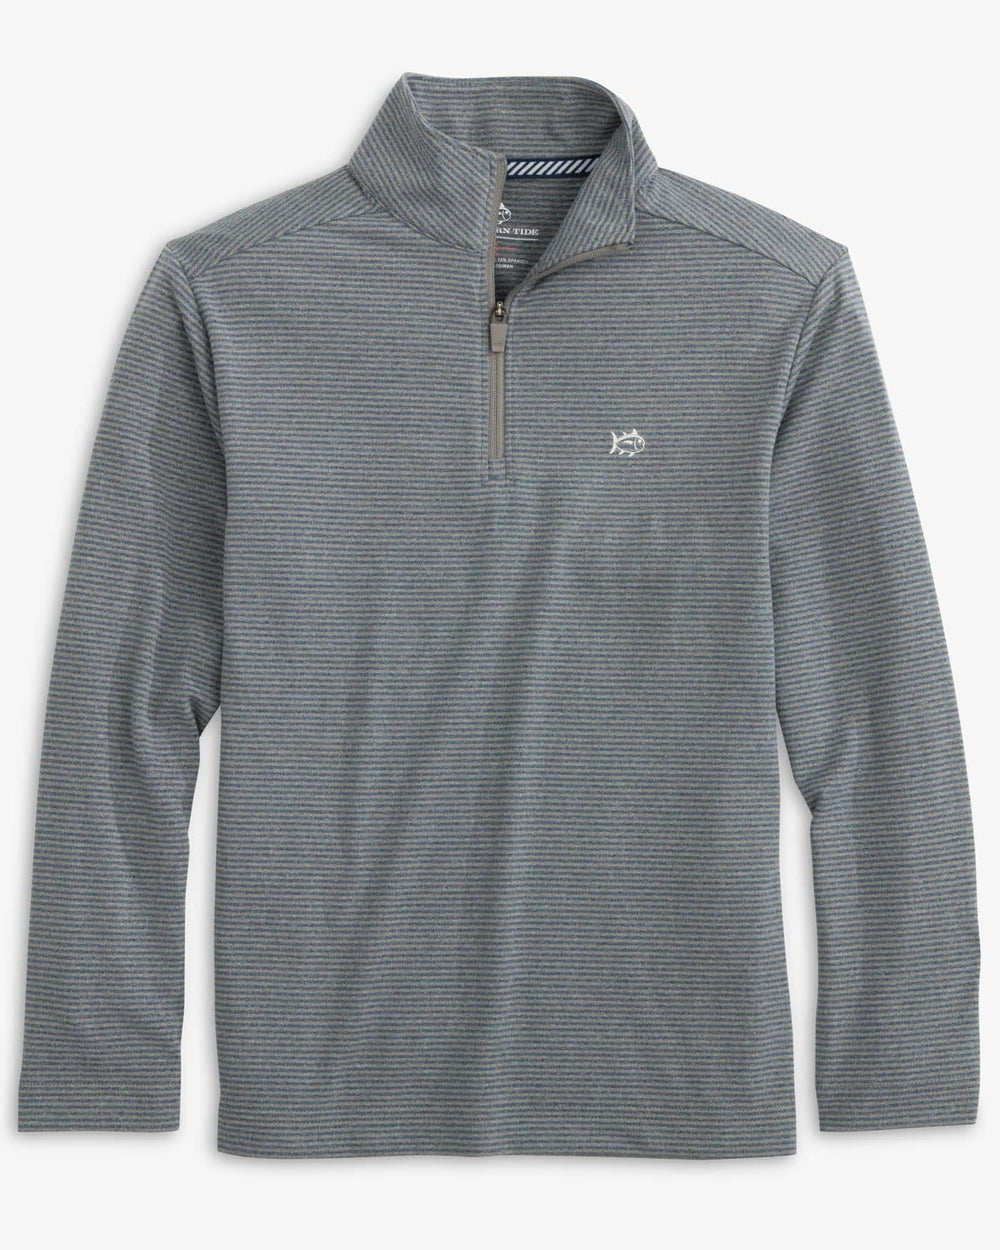 The front view of the Southern Tide Boys Cruiser Heather Micro-Stripe Quarter Zip Pullover by Southern Tide - Heather Shadow Grey